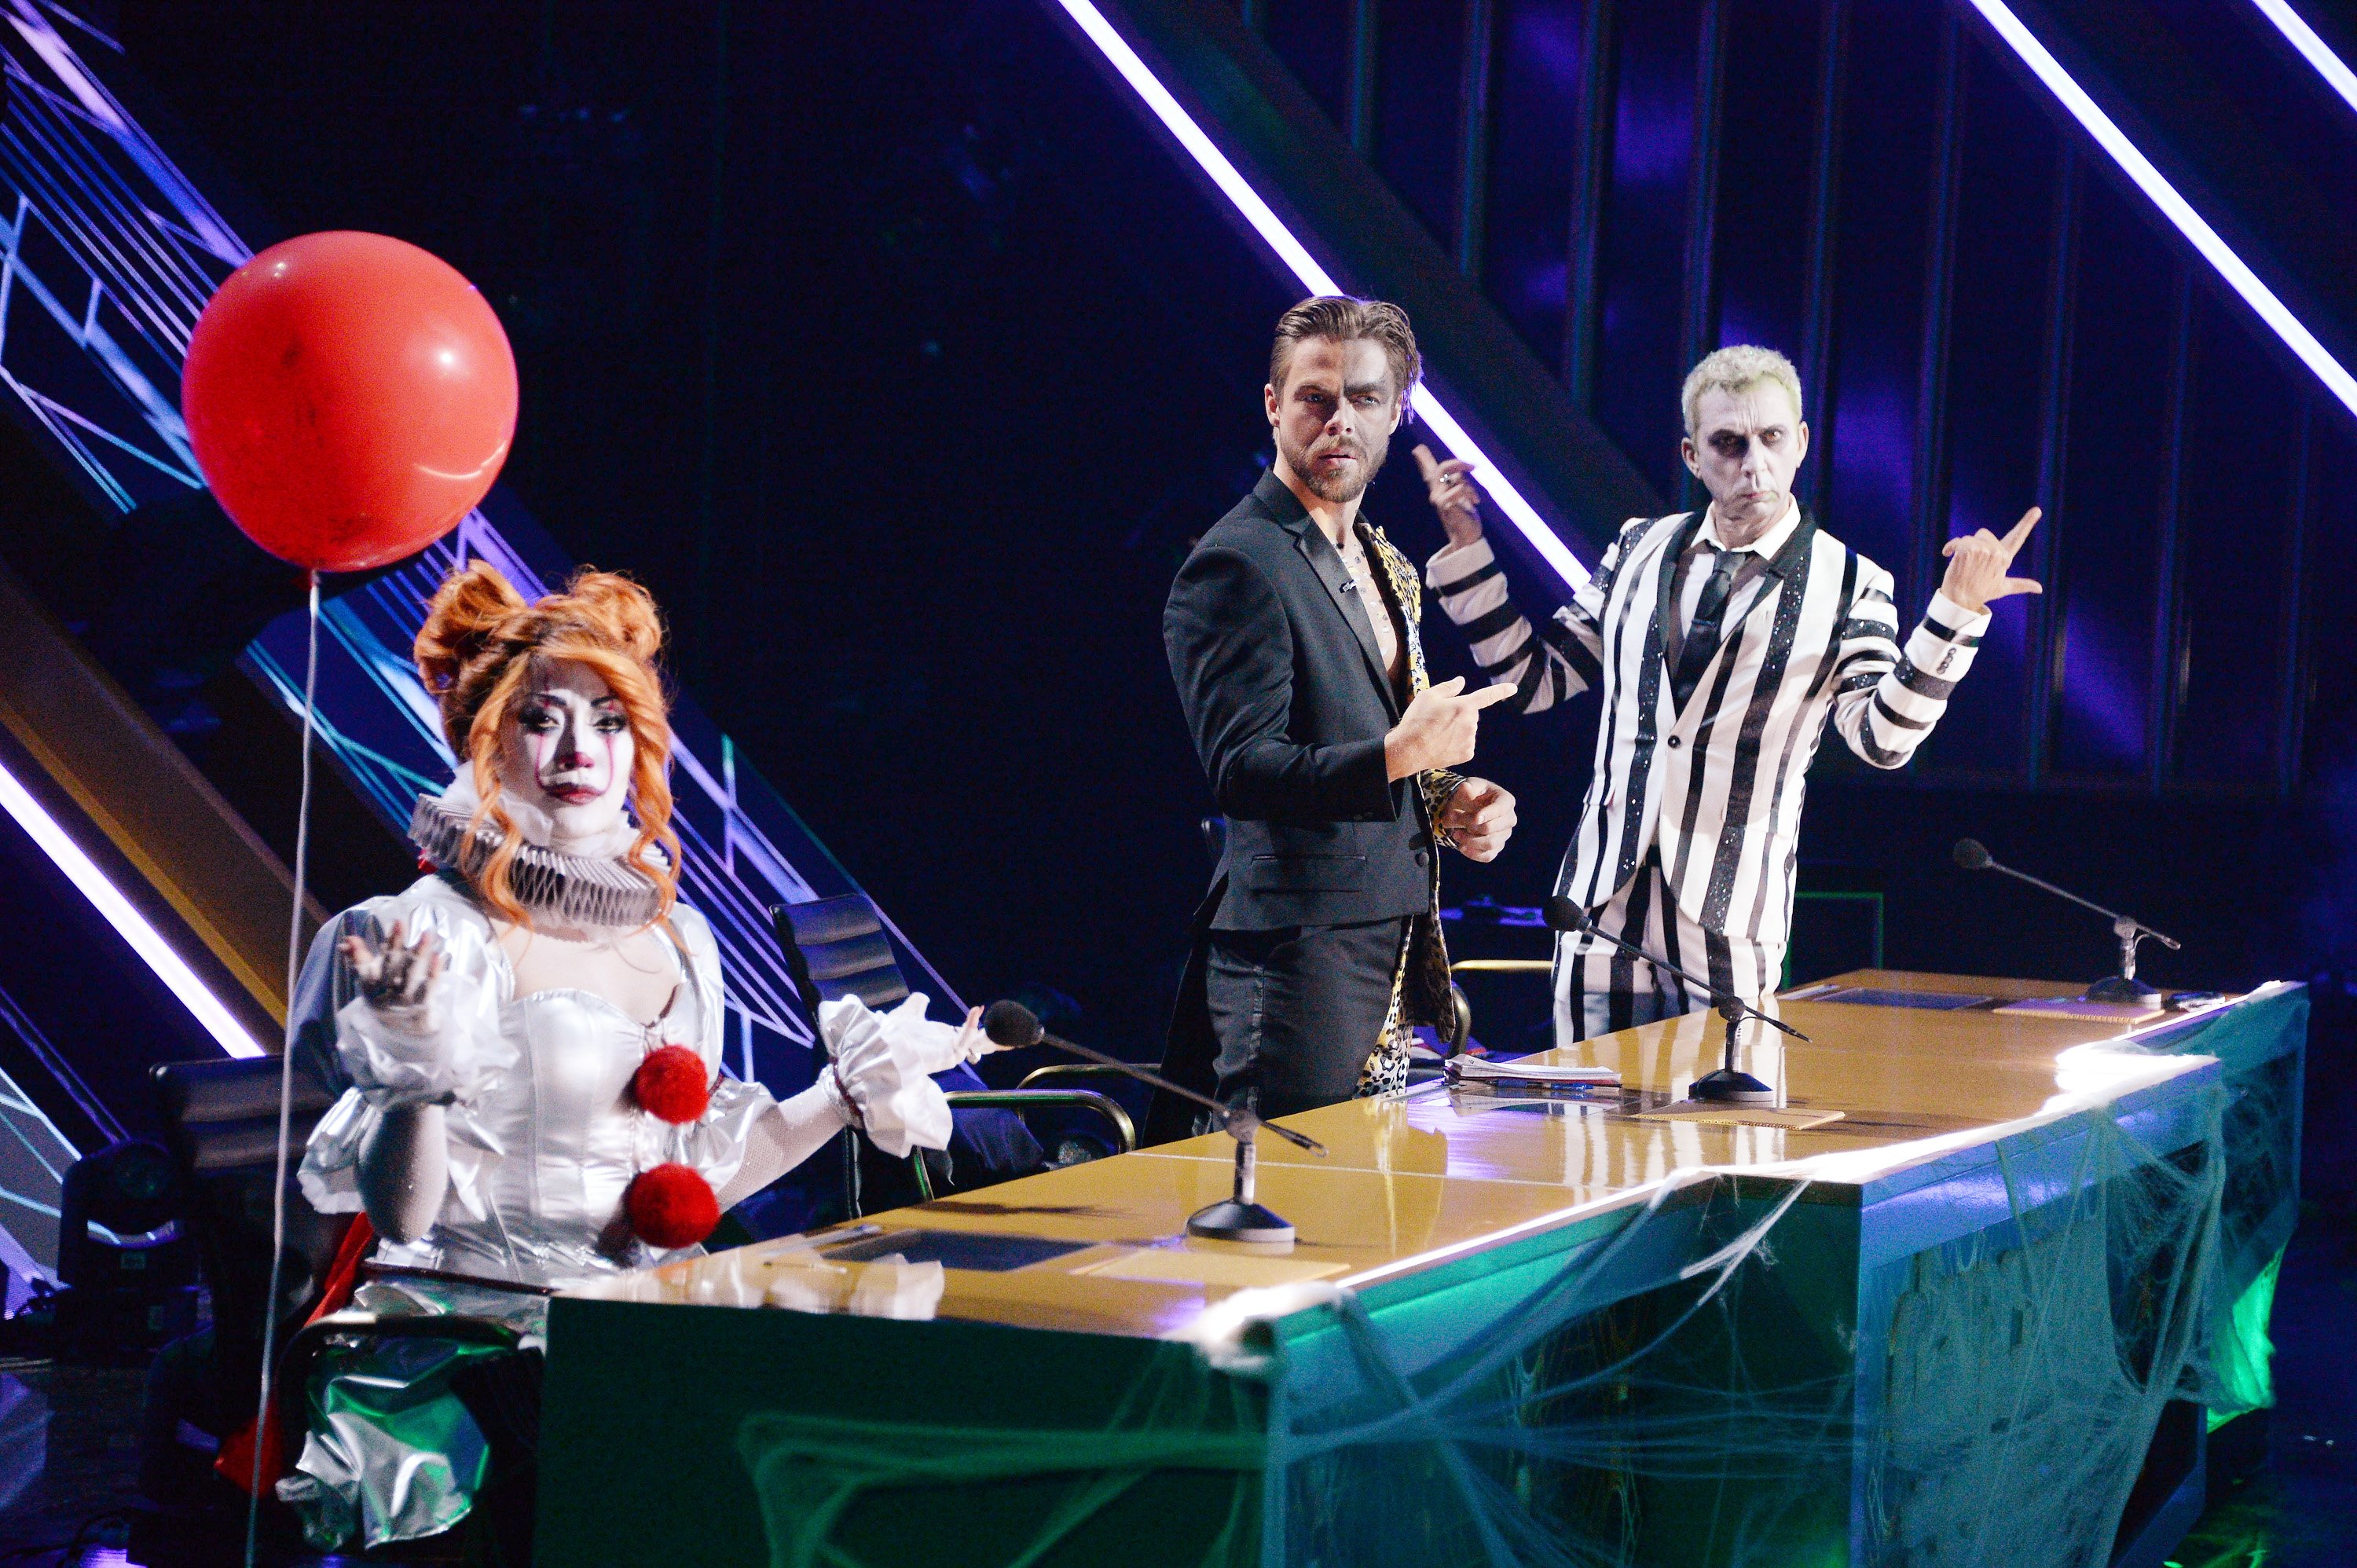 Carrie Ann Inaba in an 'IT' costume sitting at the judges panel with Derek Hough and Bruno Tonioli during the season 29 Horror Night on 'Dancing with the Stars'